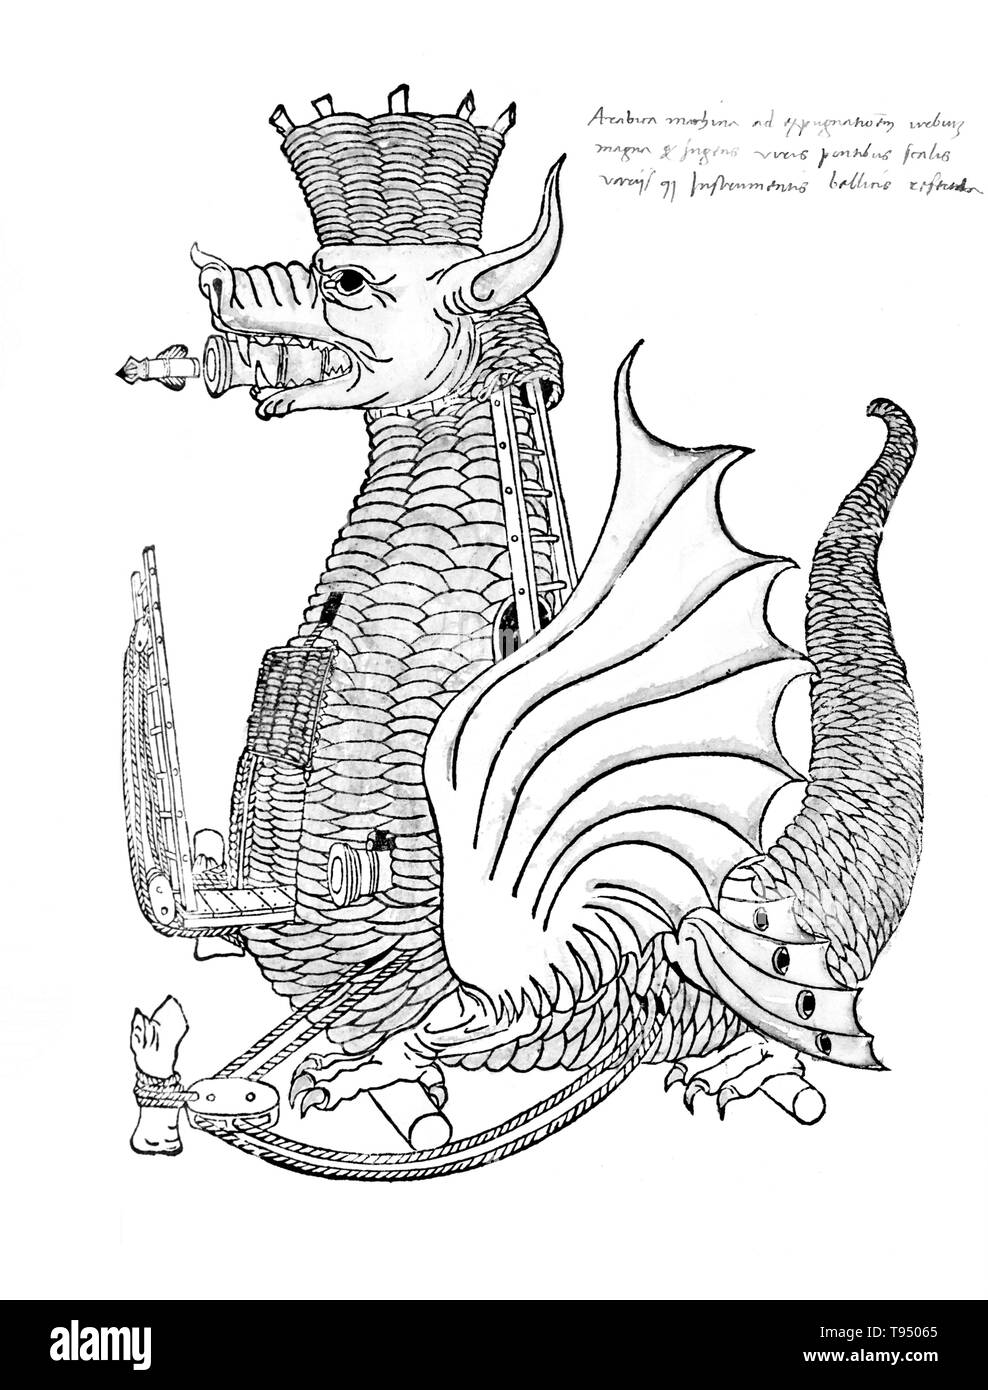 Dragon-shaped, mobile fortress equipped cannons and capable of carrying troops, with a ladder device mounted on the front used for scaling walls or as a bridge during siege warfare. Roberto Valturio, 1472. Roberto Valturio (1405-1475) was an Italian engineer and writer. He was the author of the military treatise De Re militari (1472). Stock Photo